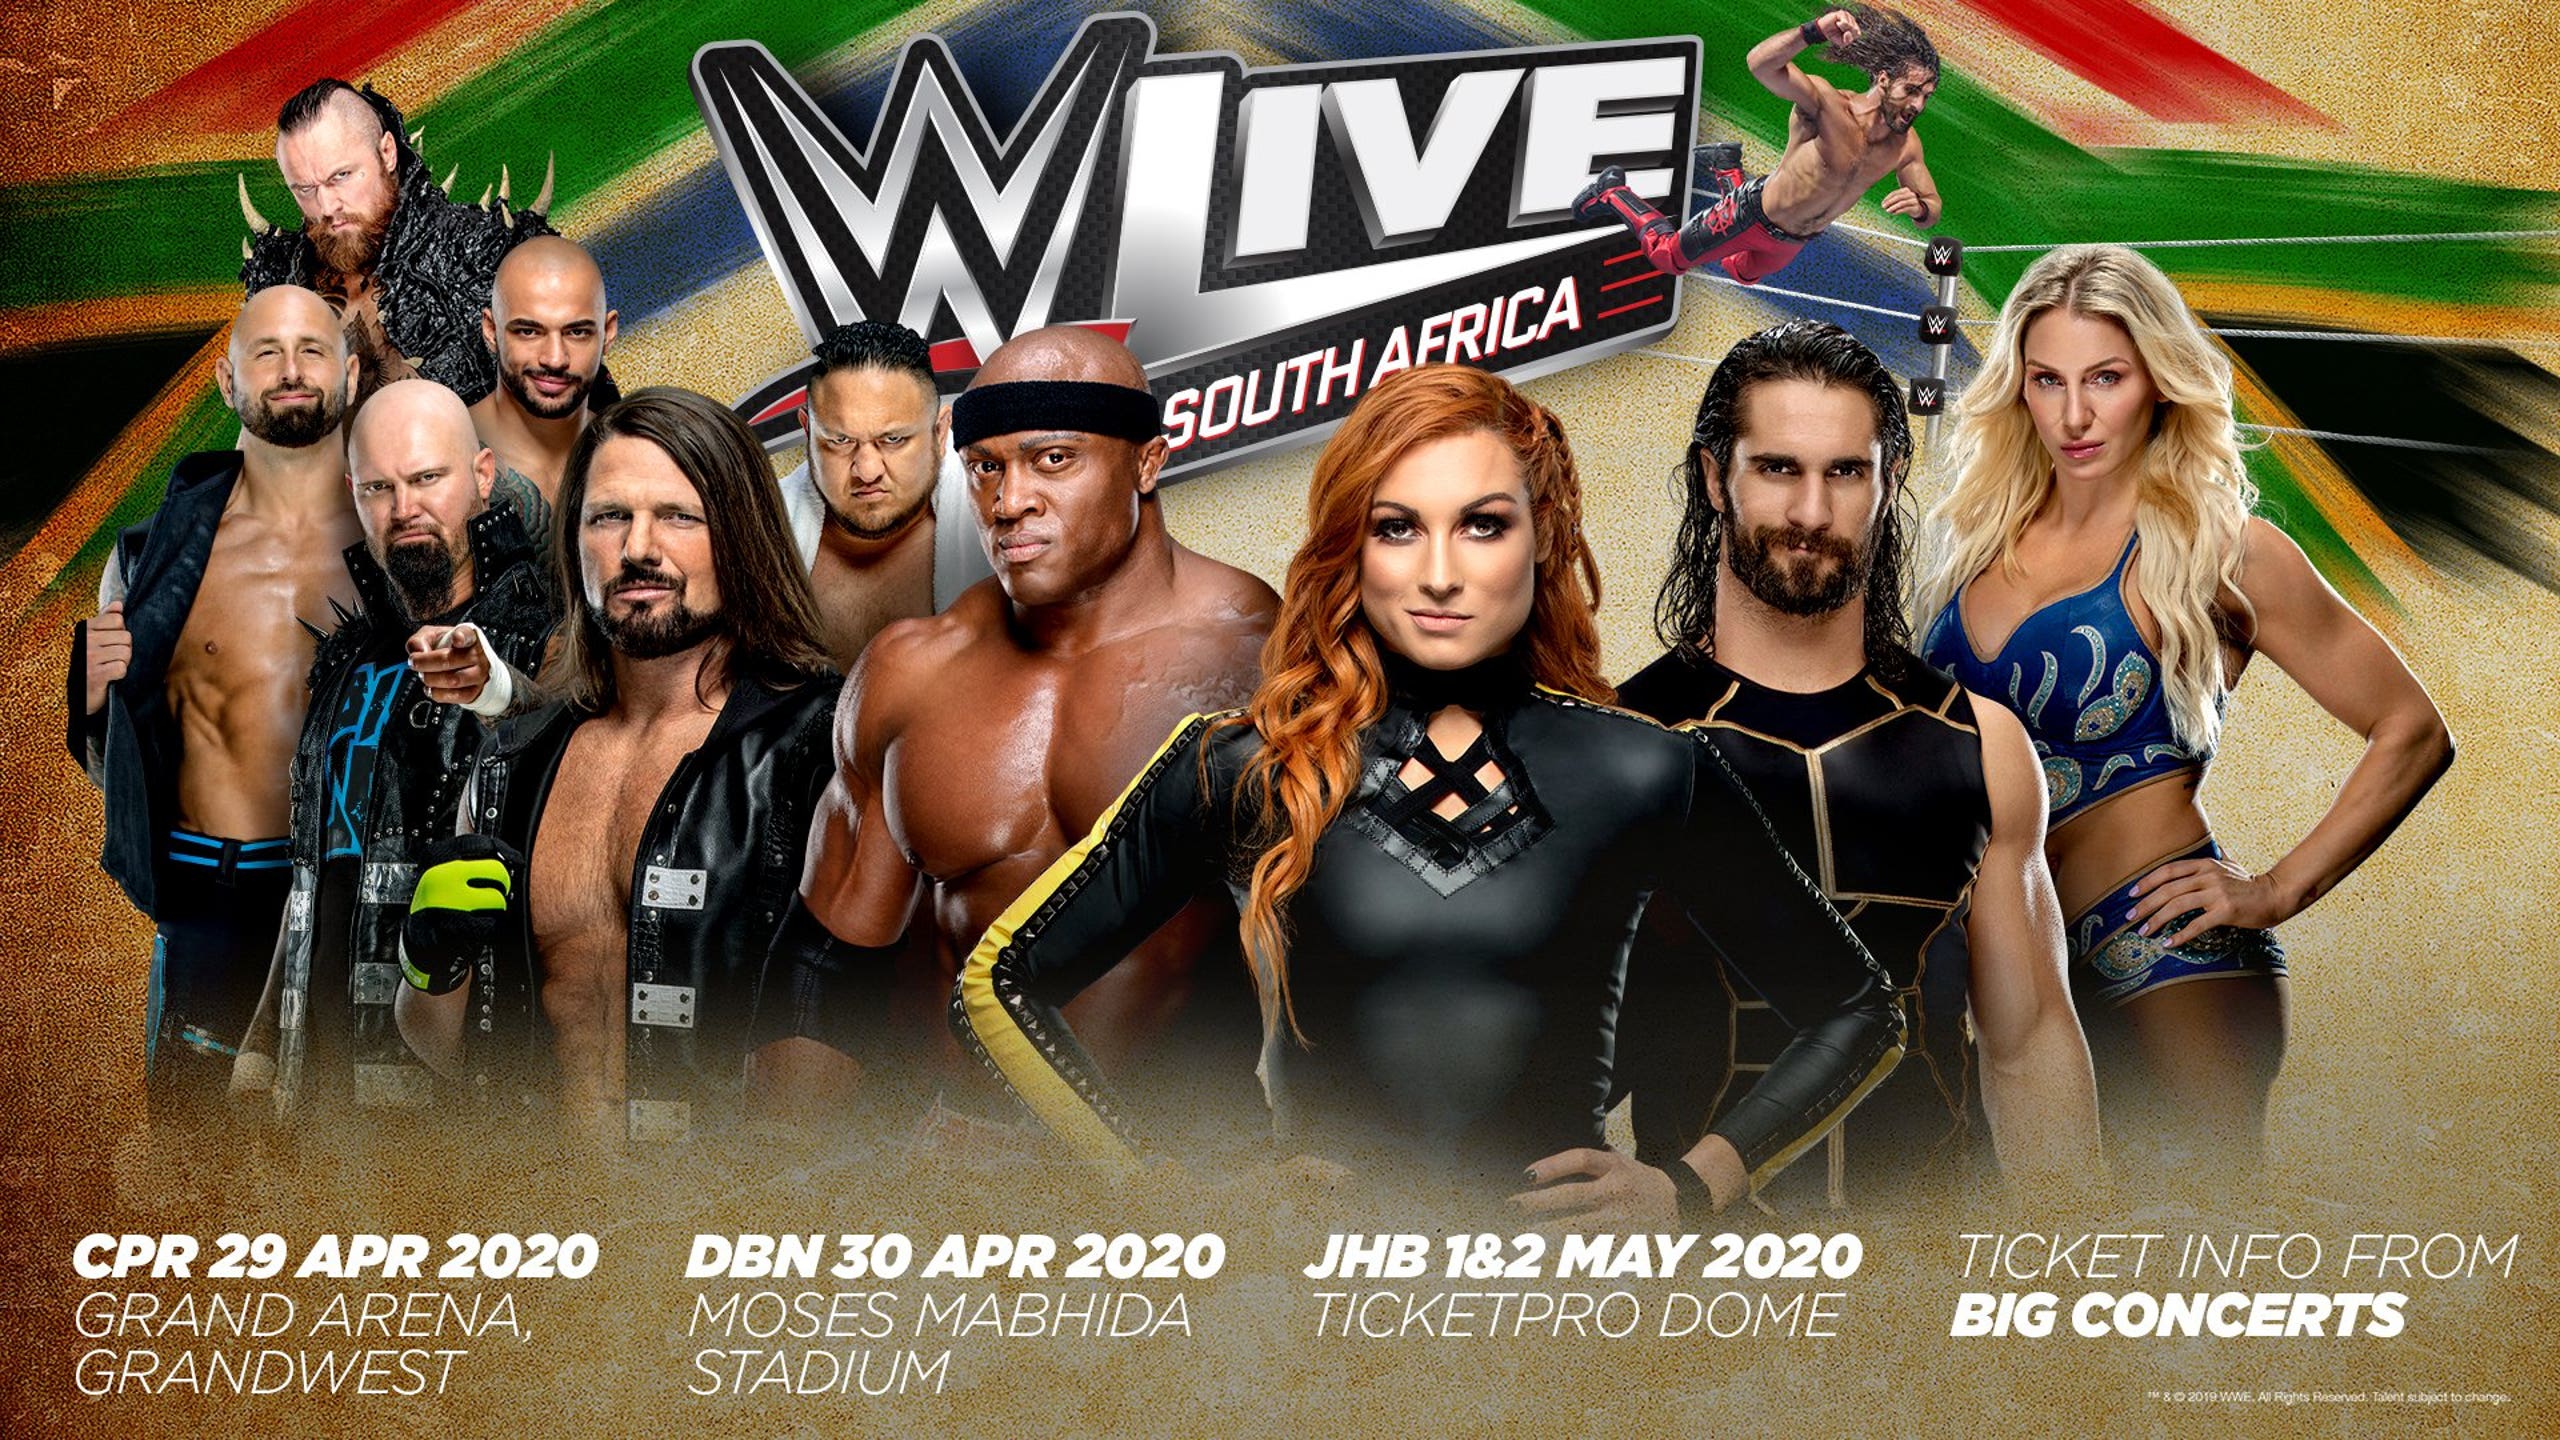 wwe tour dates 2022 south africa